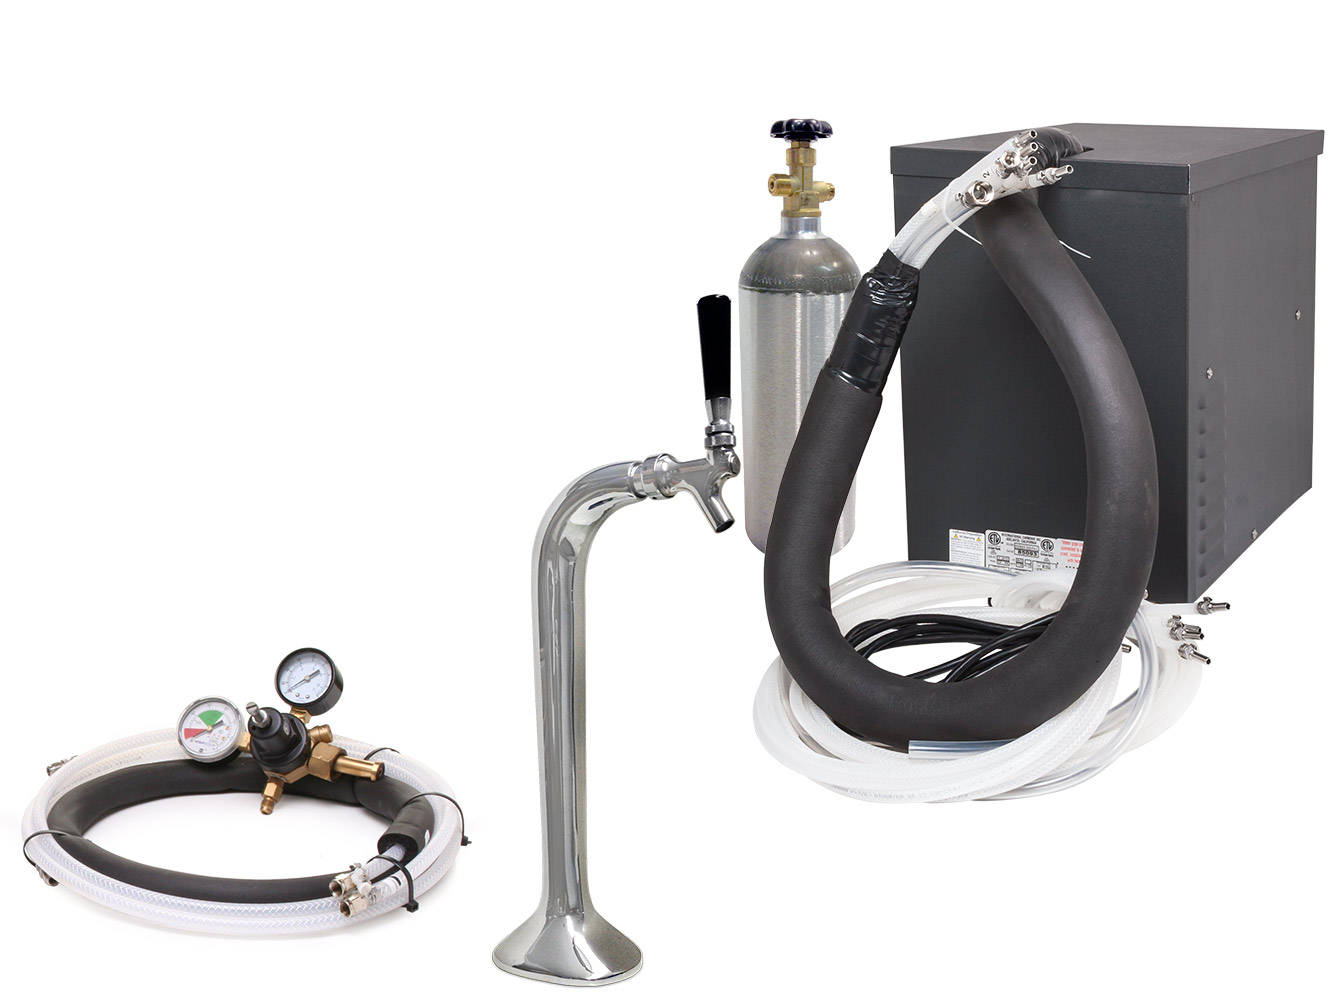 Seltzer Home Soda Draft Arm (Snake) System with Compact Remote Chiller (R1000S)